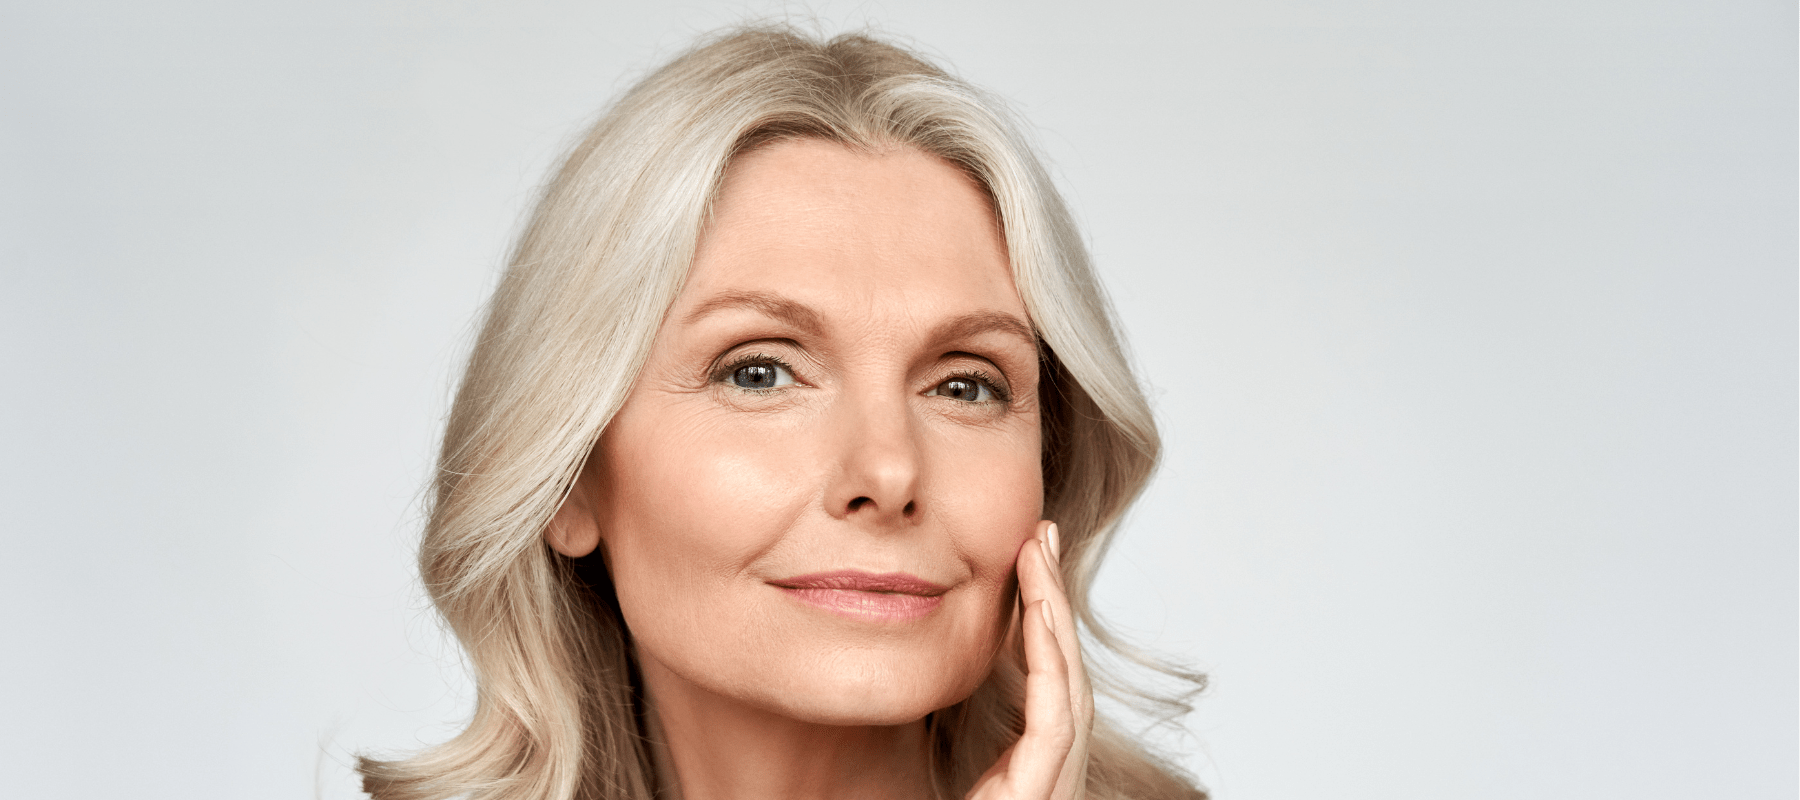 Skin ageing is a complex biological process influenced by a combination of endogenous or intrinsic(factors that originate internally) and exogenous or extrinsic factors (external factors that aren’t genetically determined).